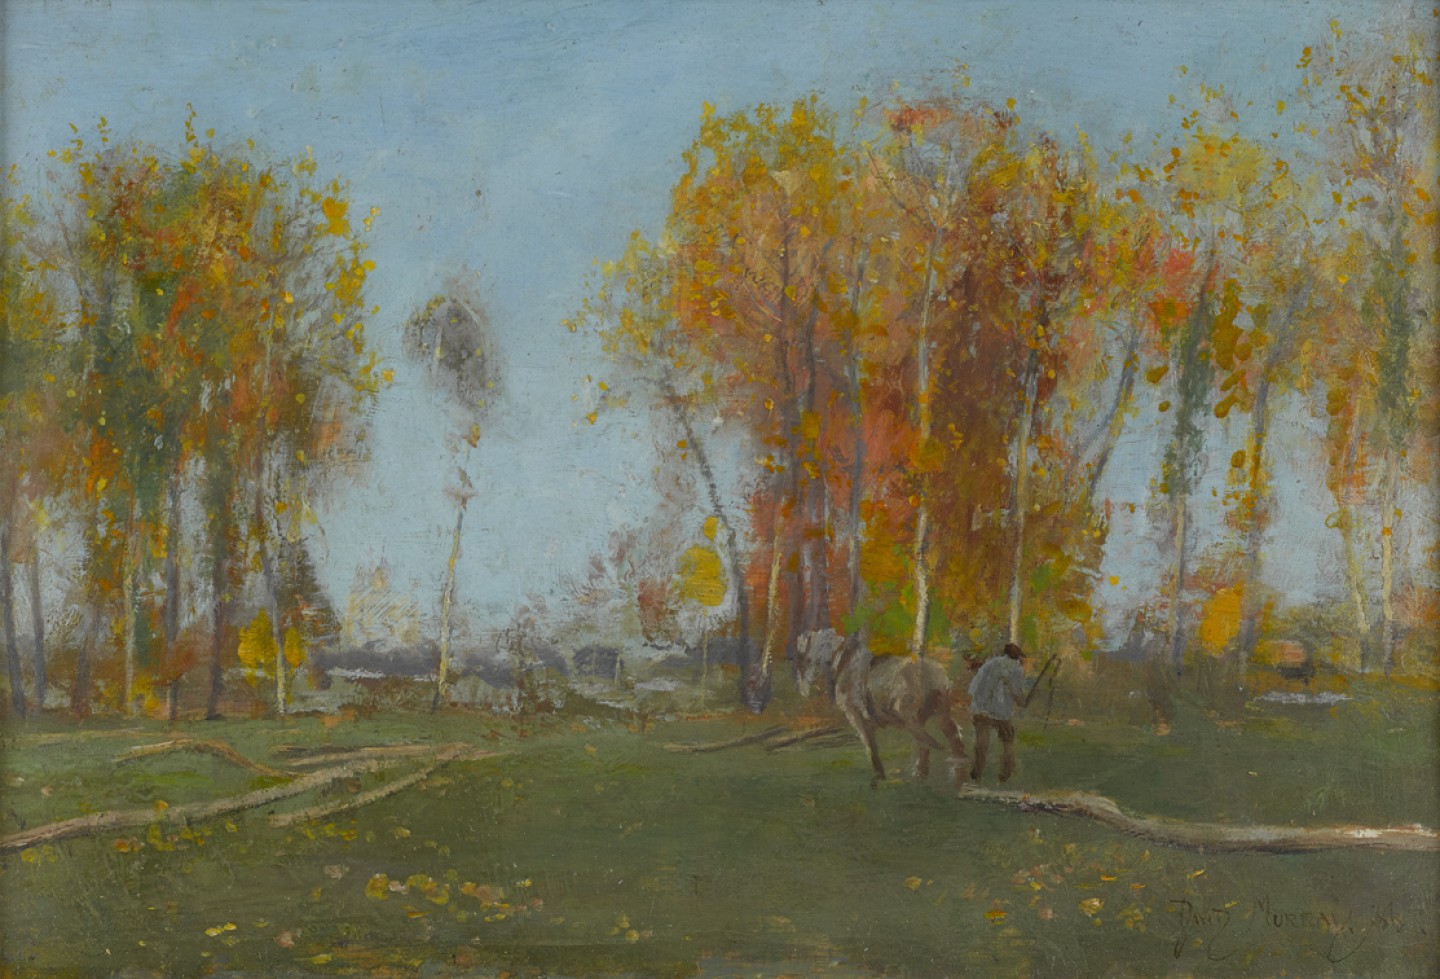 Woodsman and Horse in an Autumn Landscape